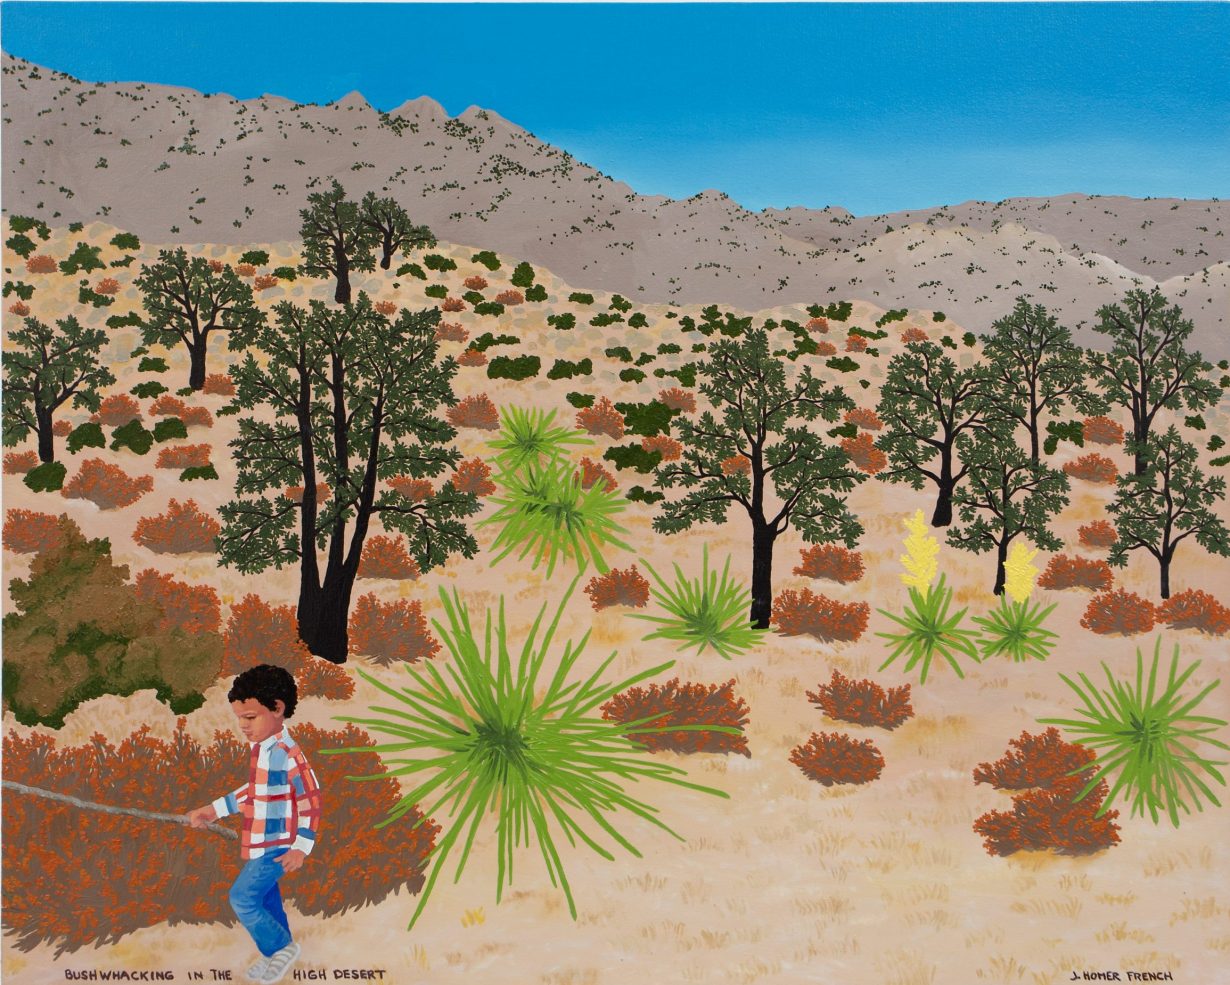 Bushwacking in the High Desert, 2021, oil on canvas, 61 × 76 cm. Courtesy the artist and Massimo De Carlo